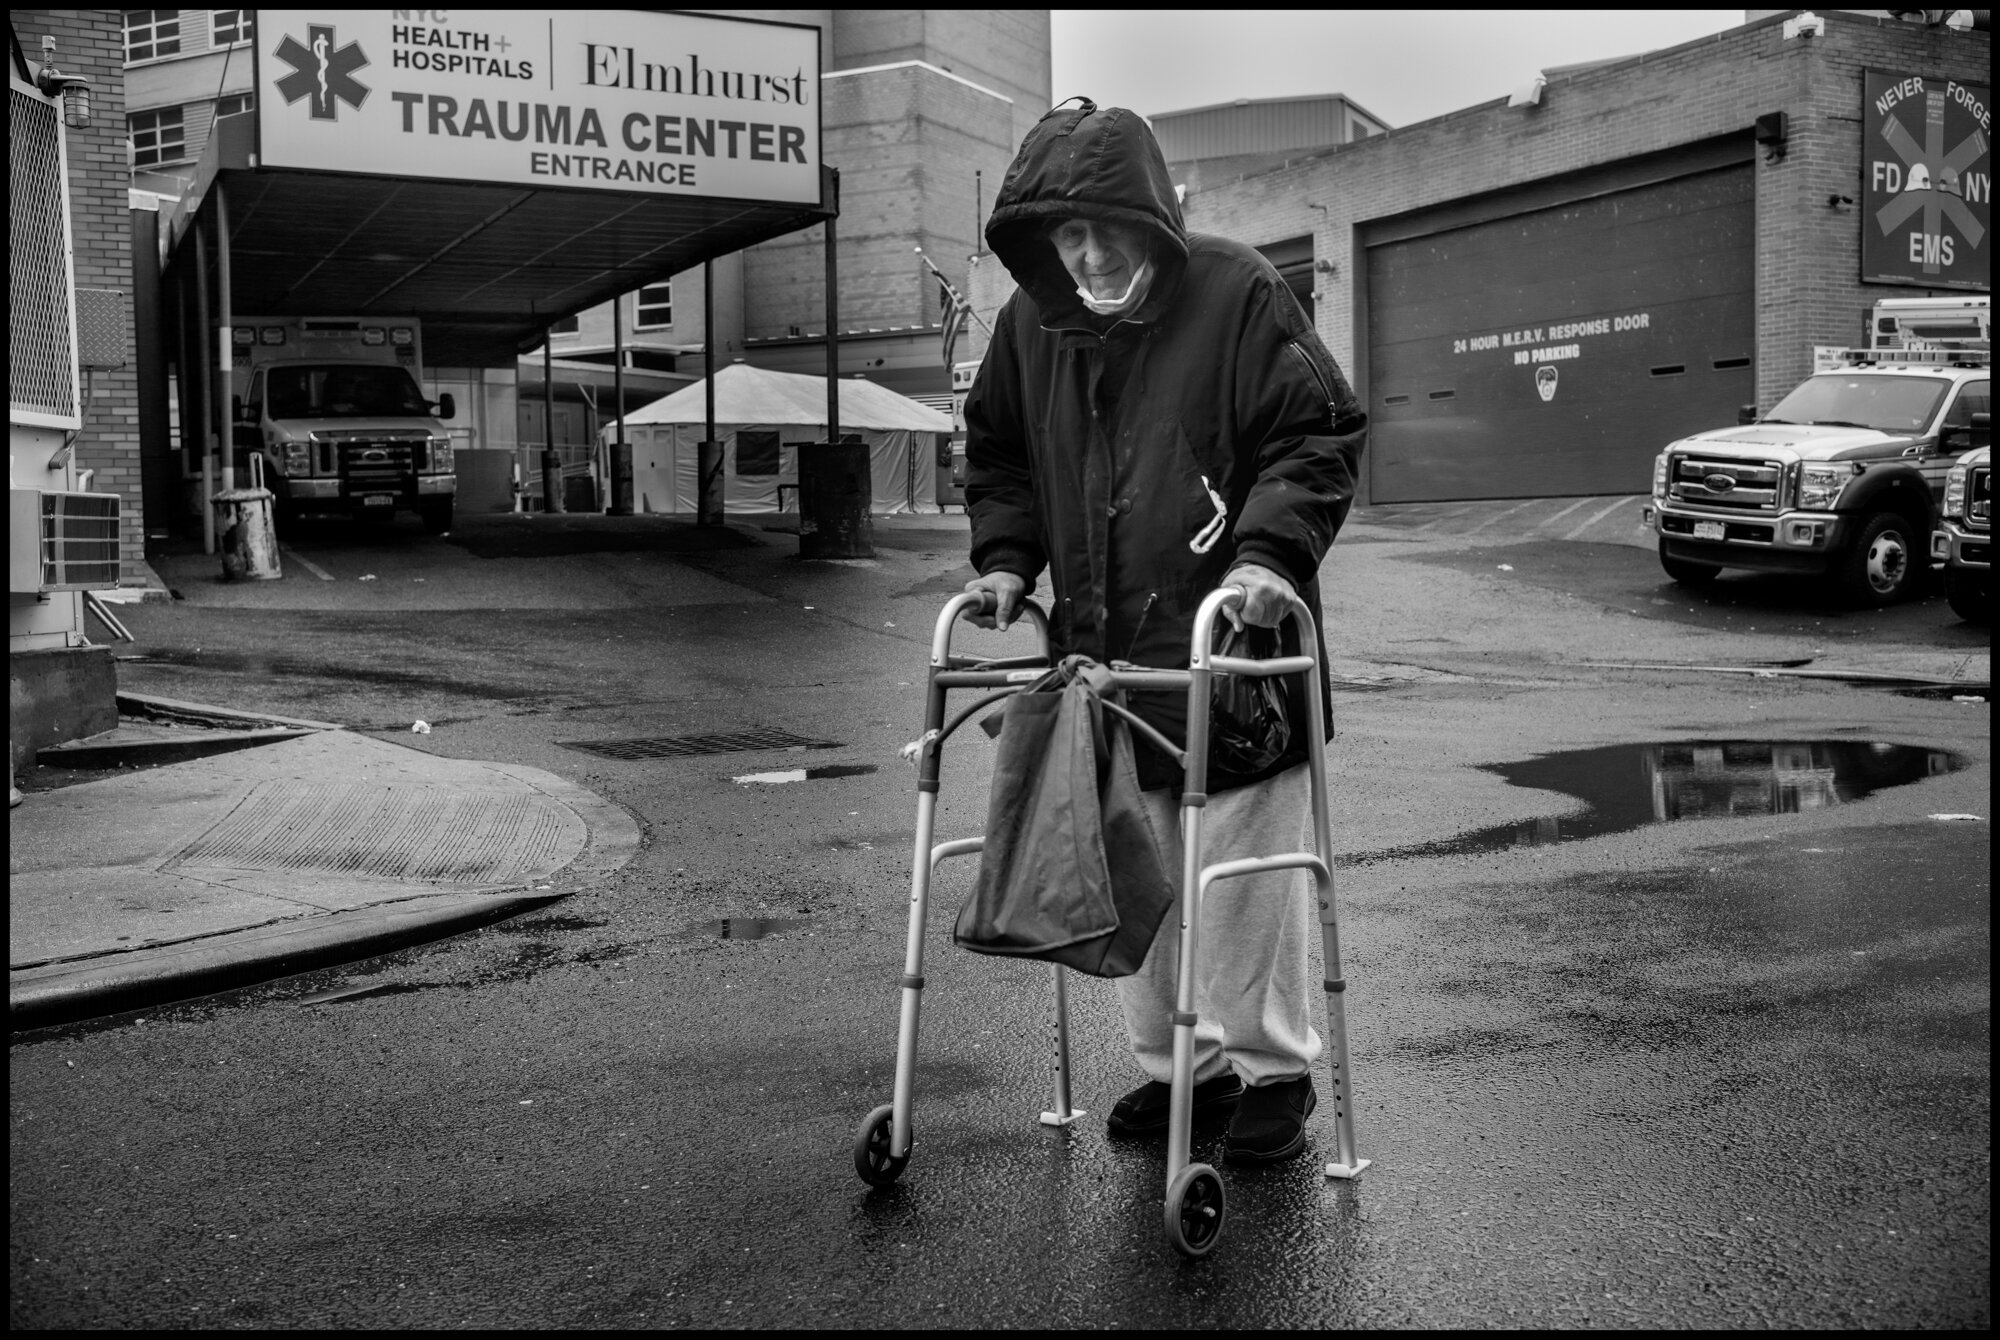  Charlie, 81, “I’m trying time make the best out of a bad situation.”  March 29, 2020. © Peter Turnley  ID# 07-007 